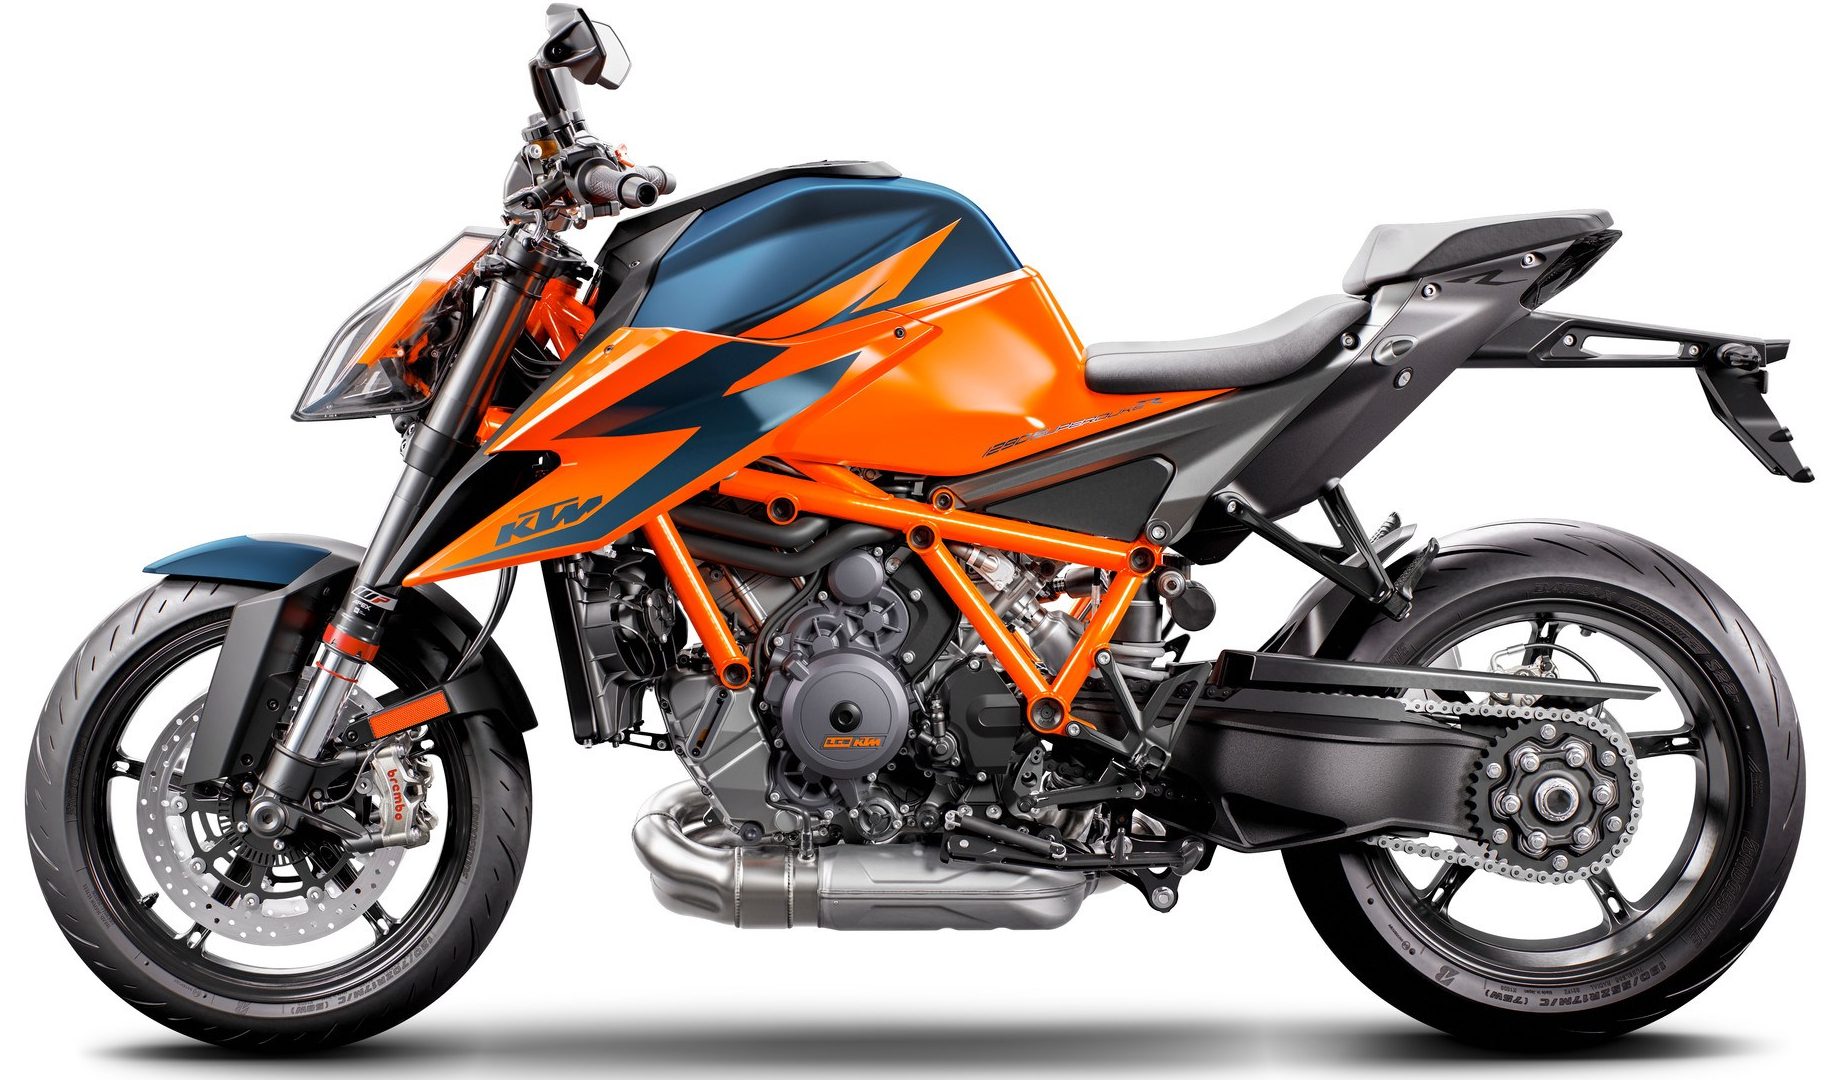 KTM to Officially Showcase the 1290 Super Duke R in India Soon - snap